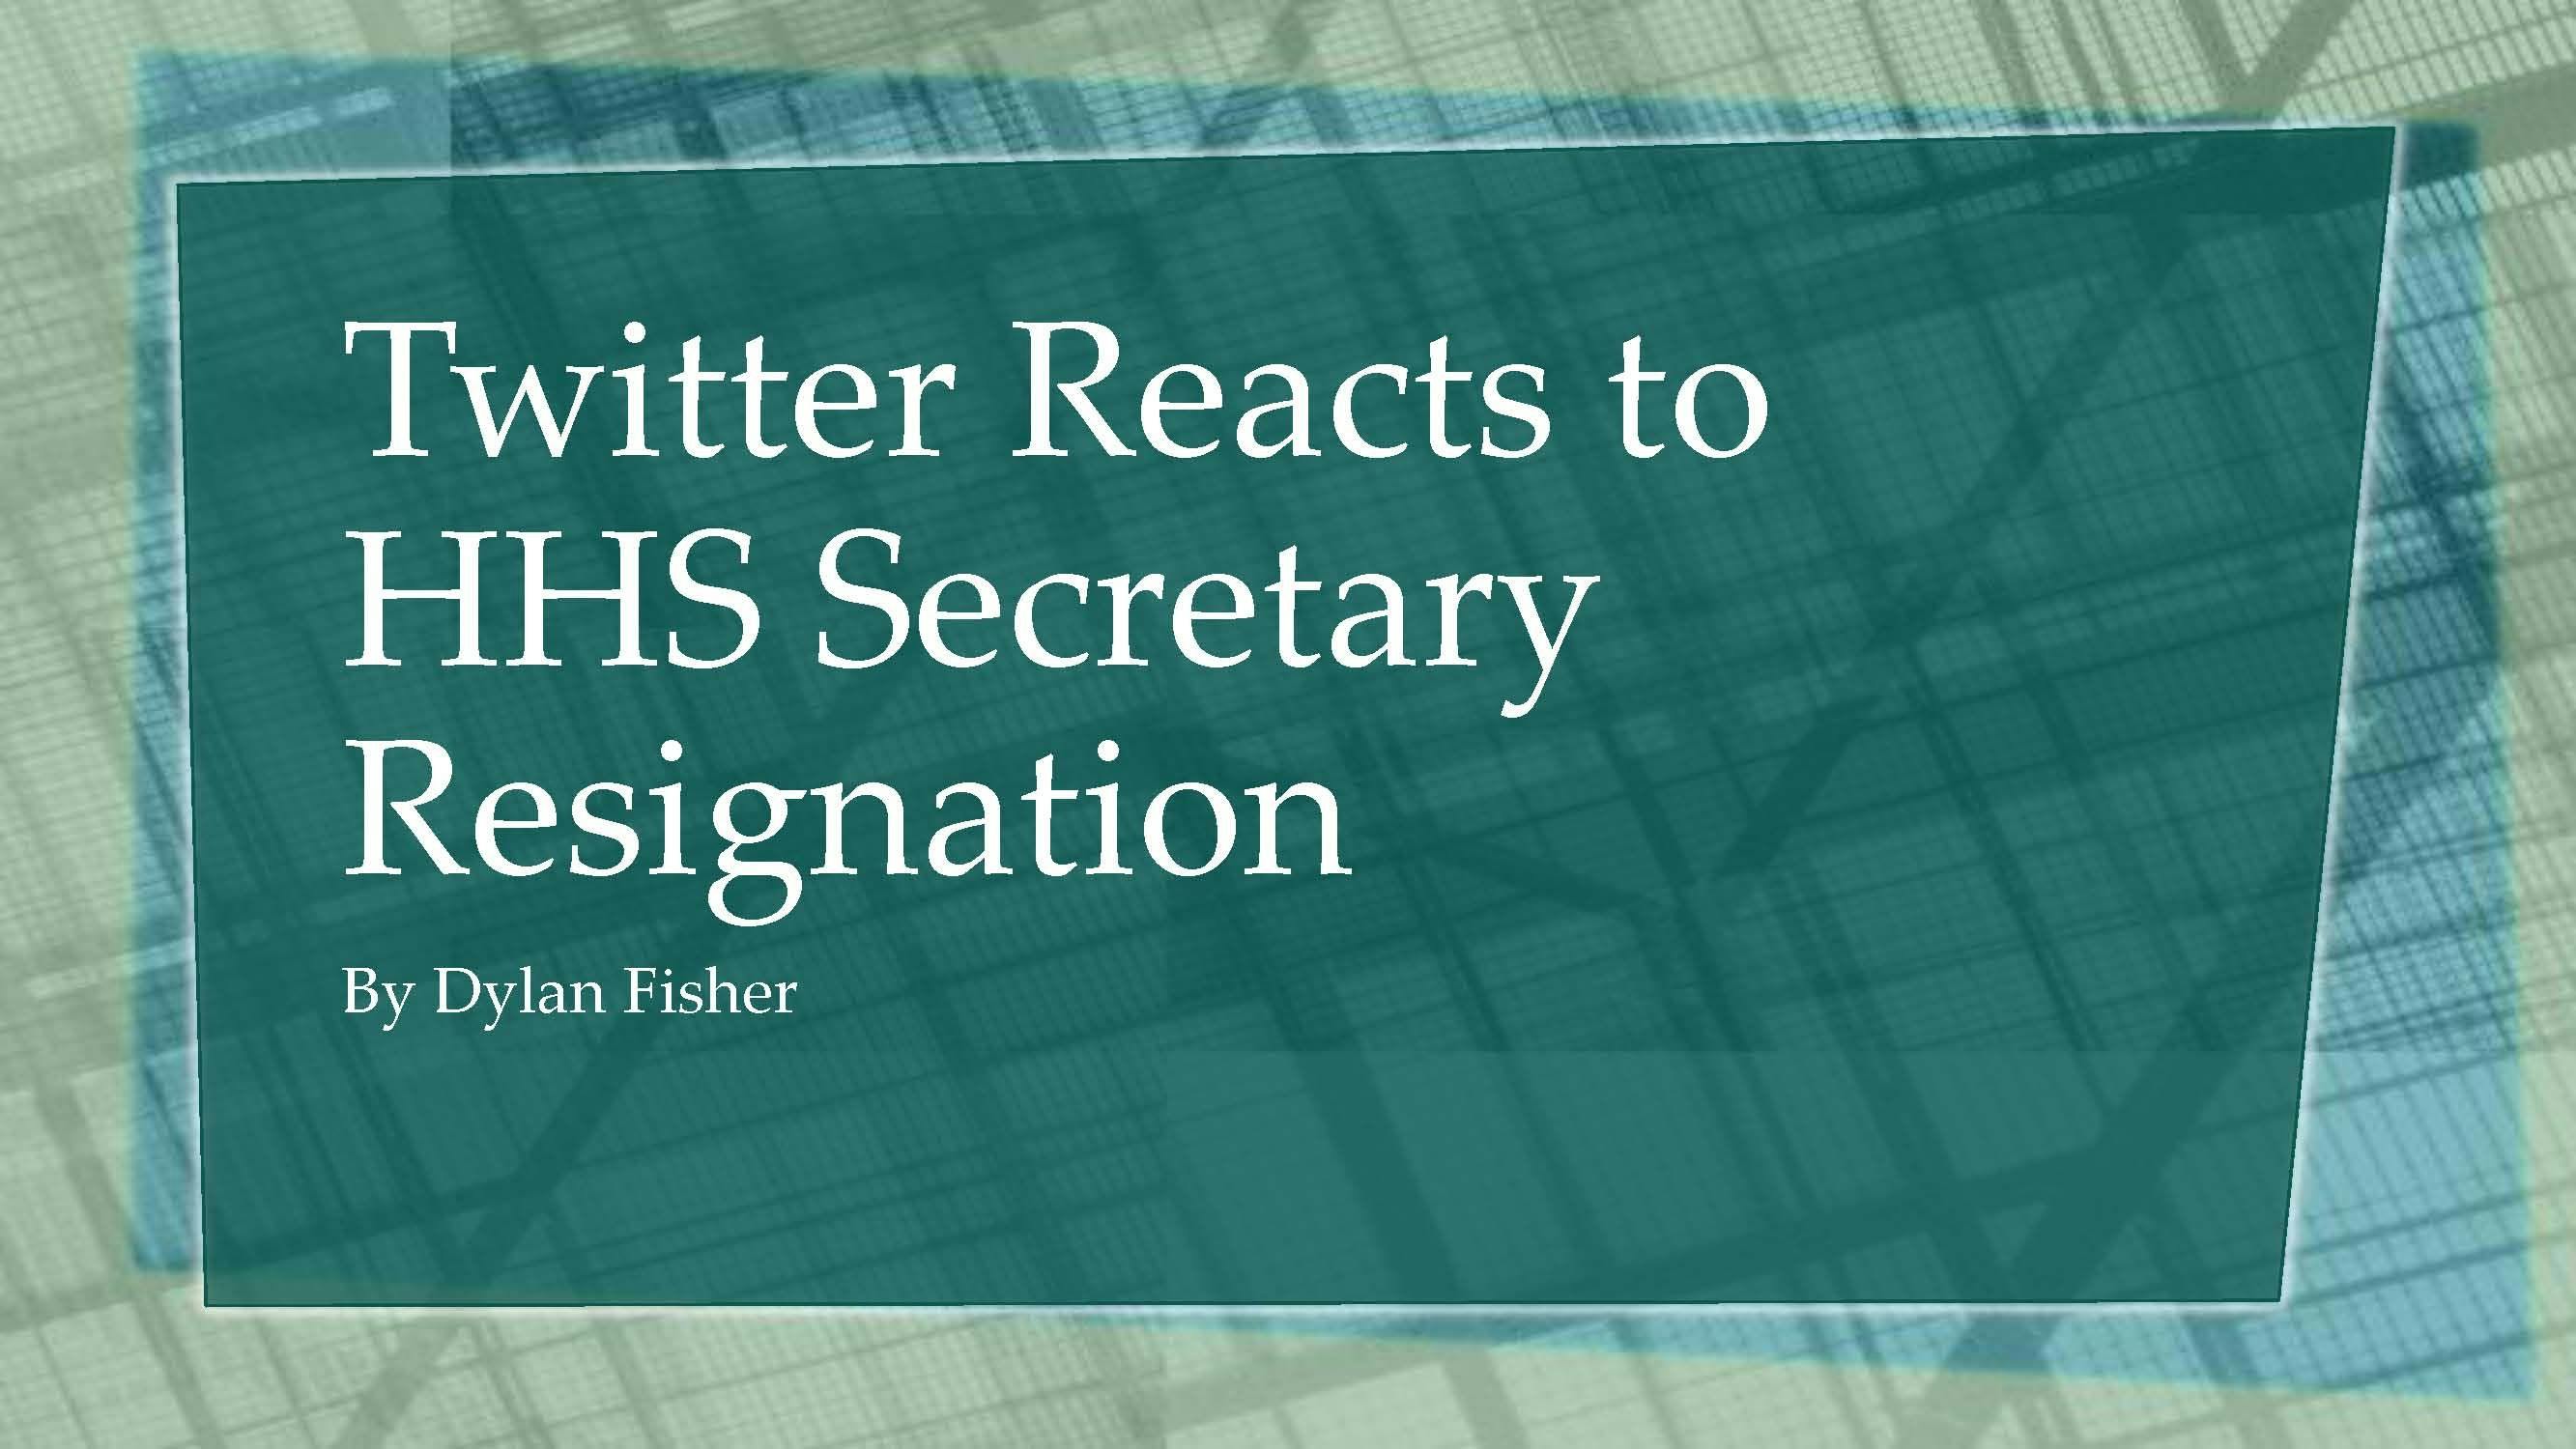 Twitter Reacts to HHS Secretary's Resignation